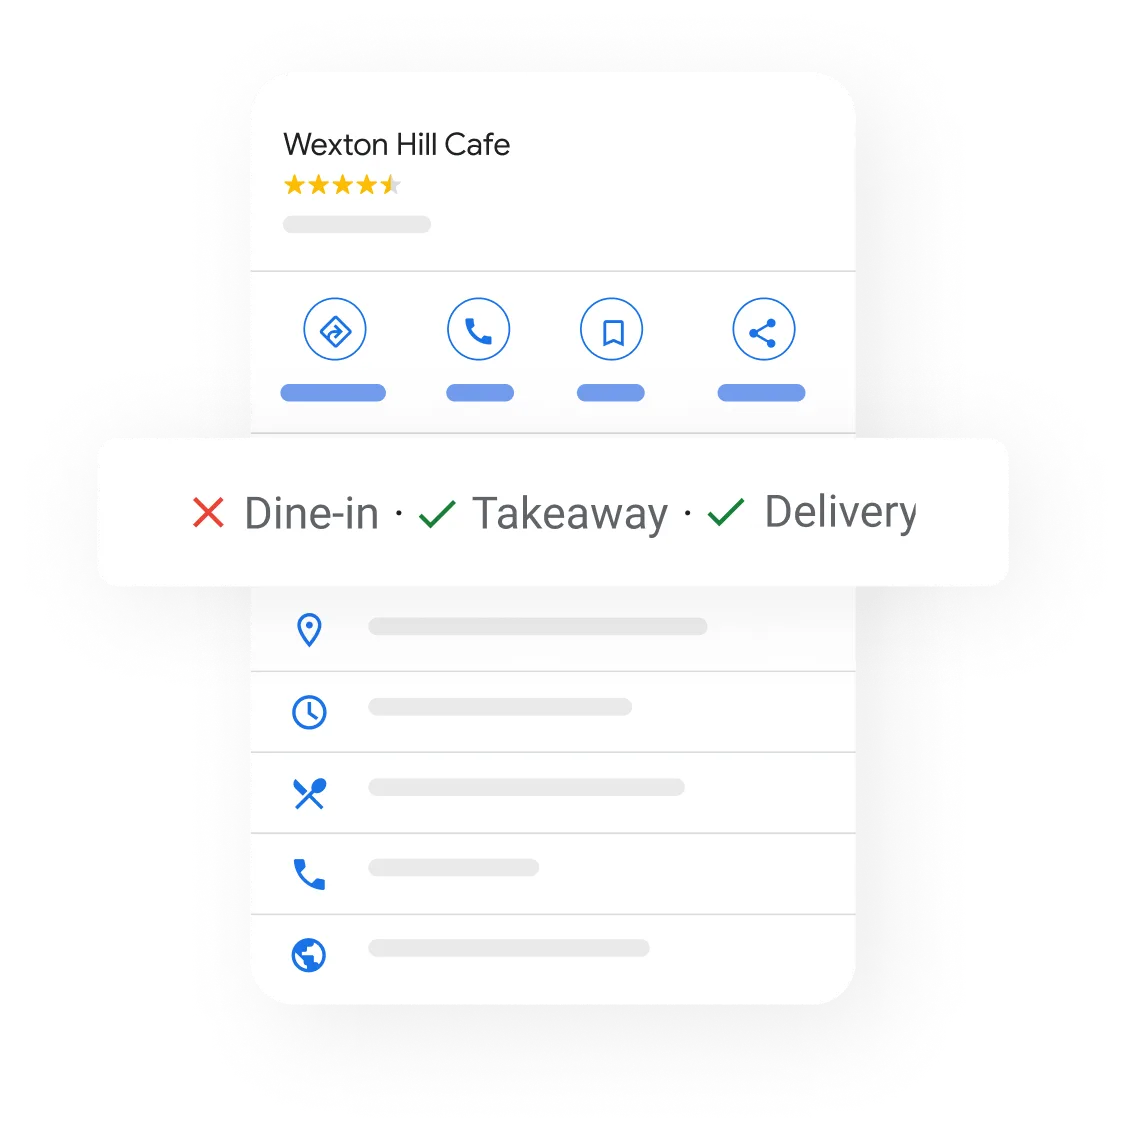 Image of a restaurant Business Profile popping out the services offered as not available dine-in and available takeaway and Delivery